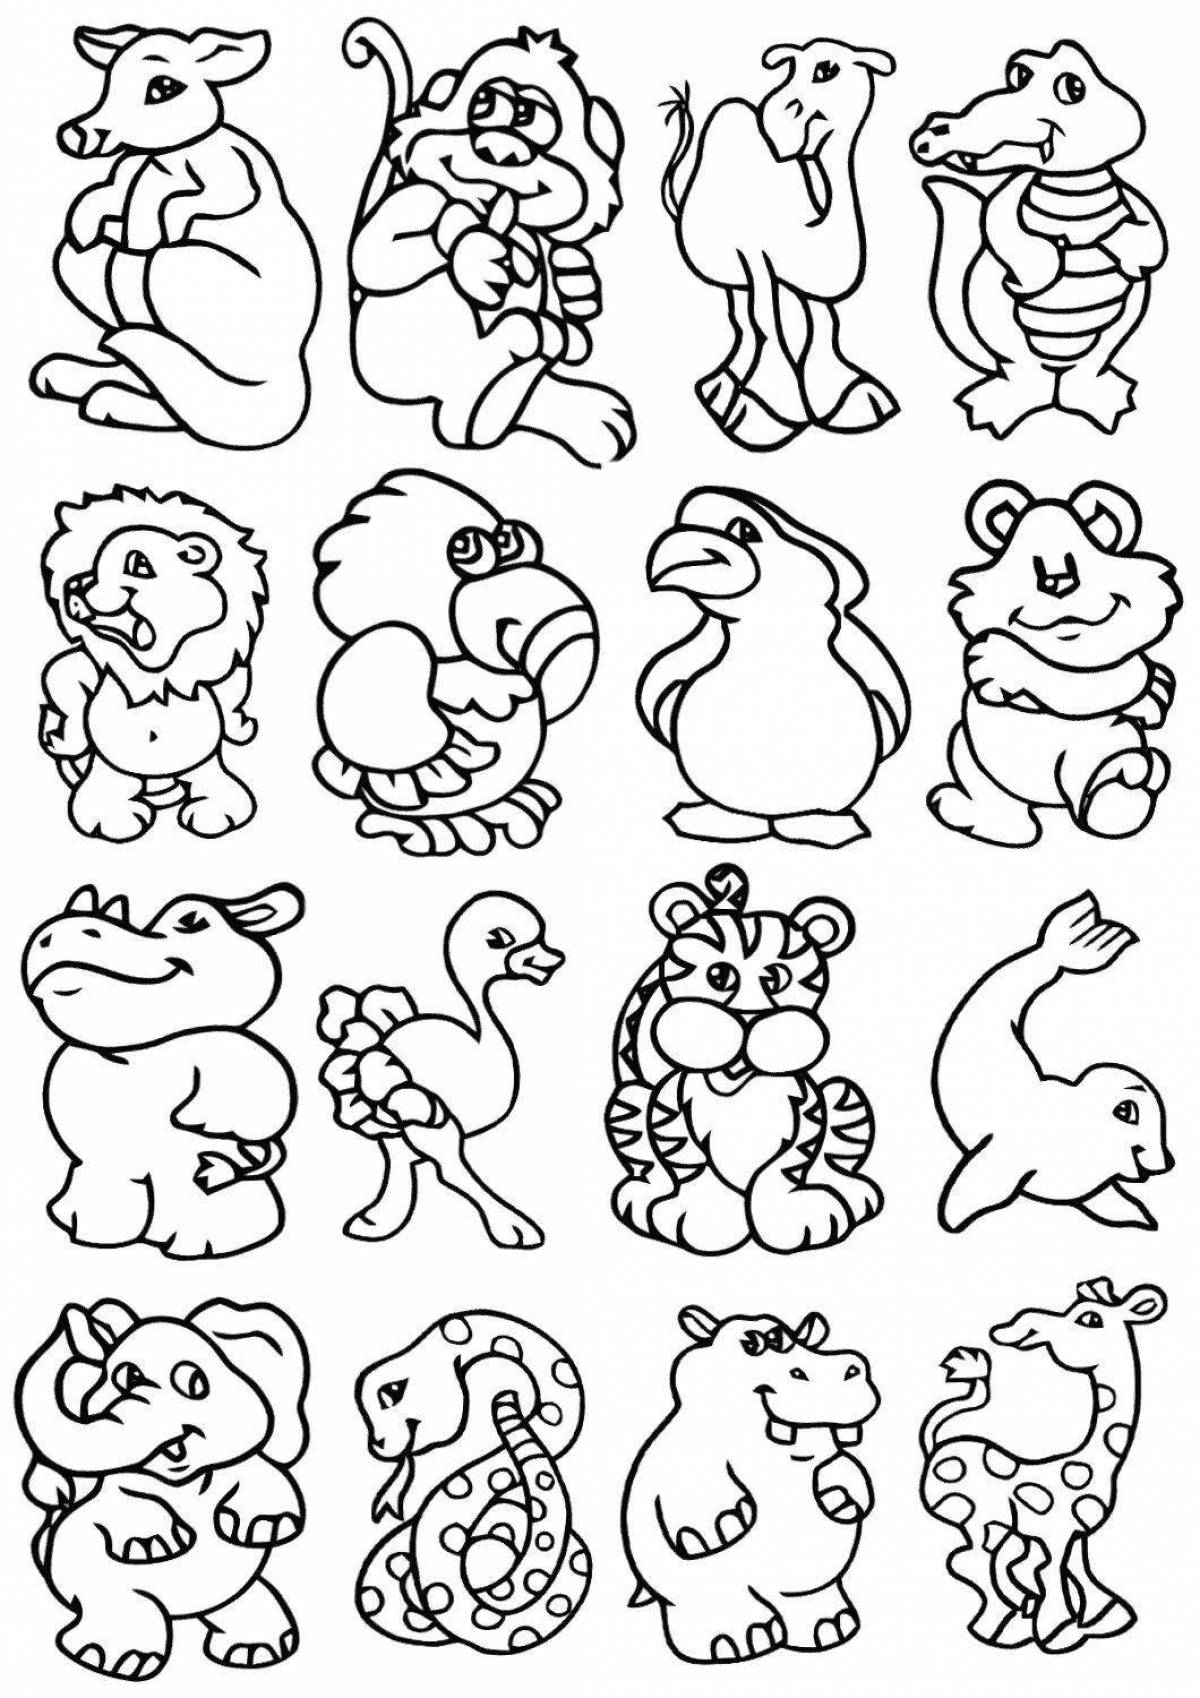 Playful coloring stickers for kids